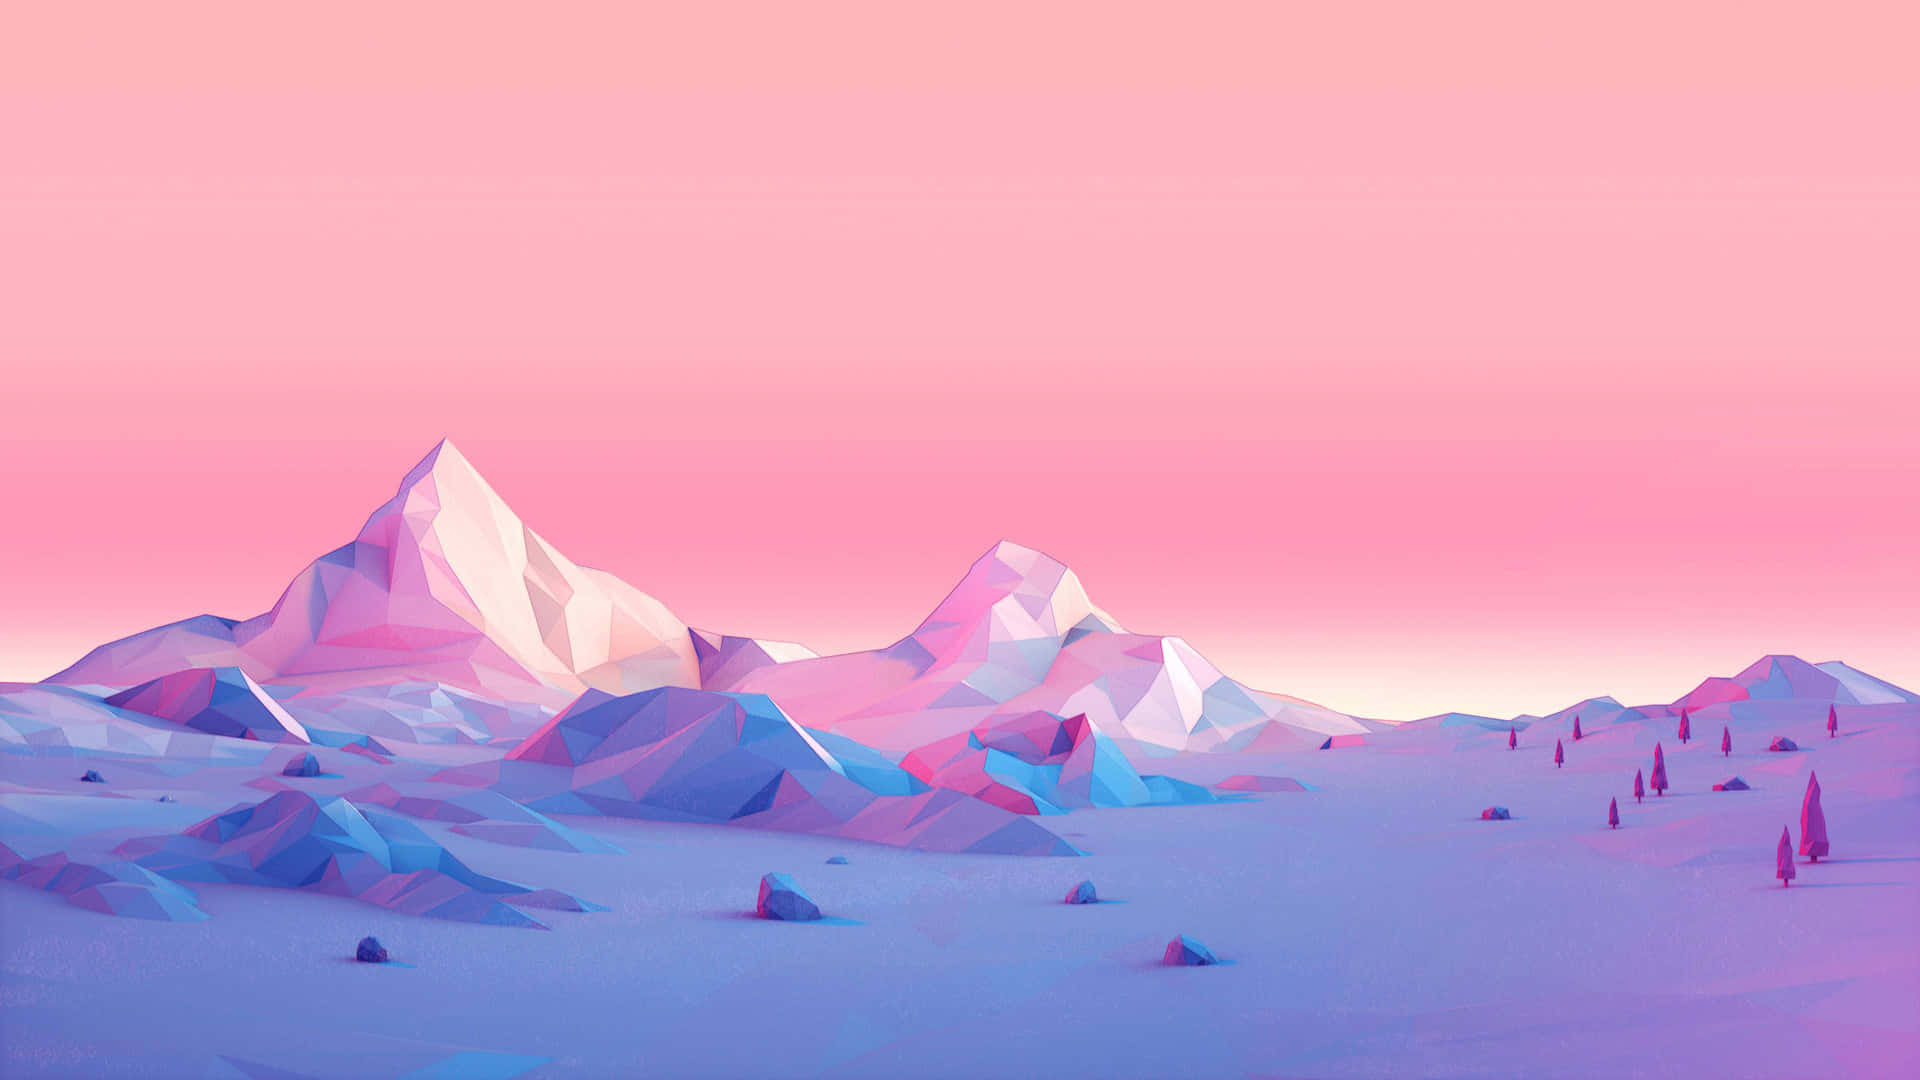 A peaceful sunrise with a minimalist mountain in the background Wallpaper